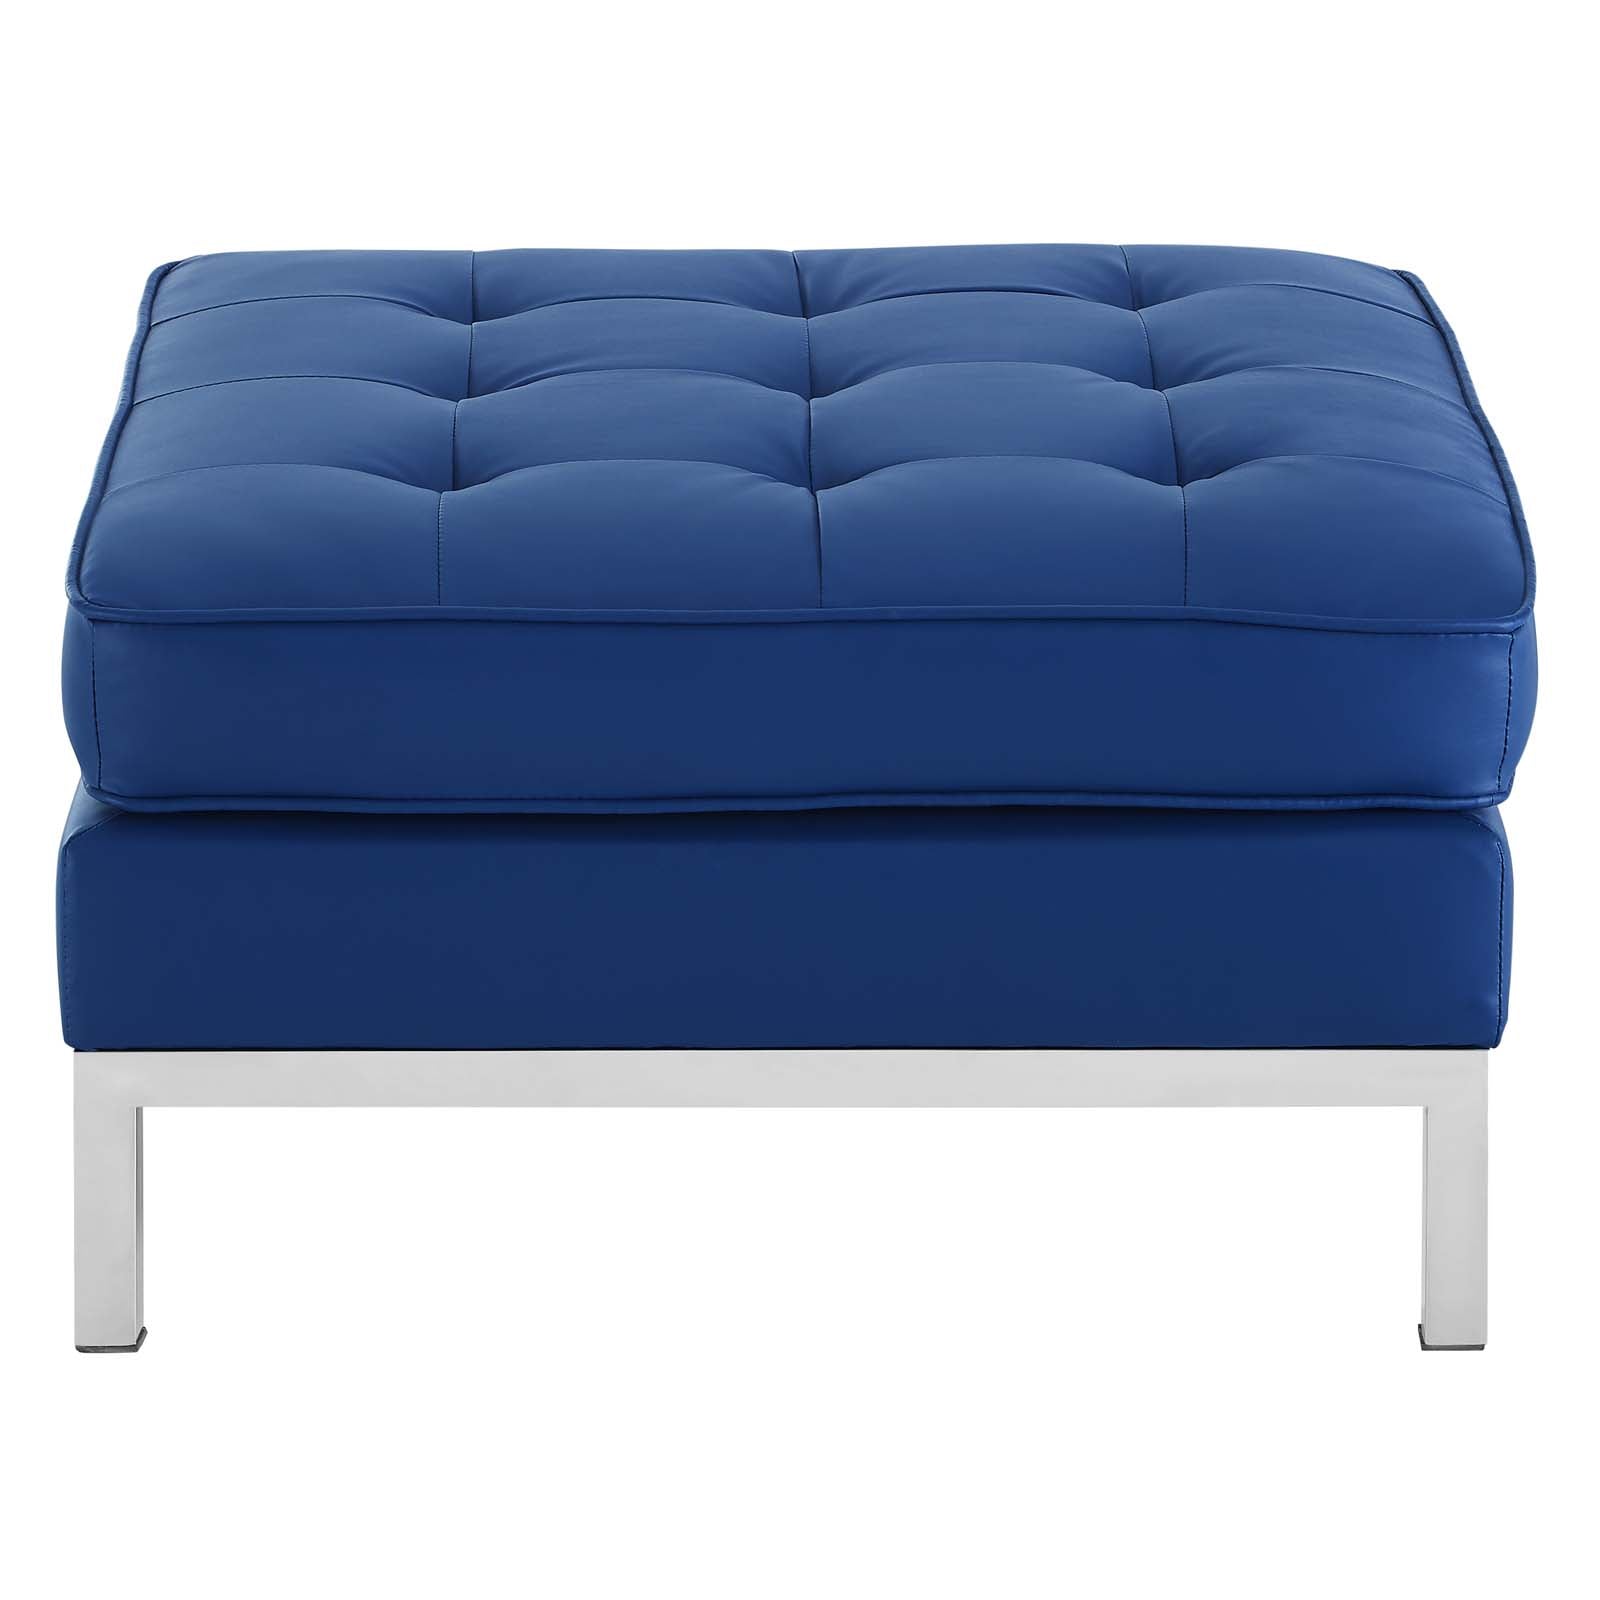 Modway Ottomans & Stools - Loft Tufted Upholstered Faux Leather Ottoman Silver Navy